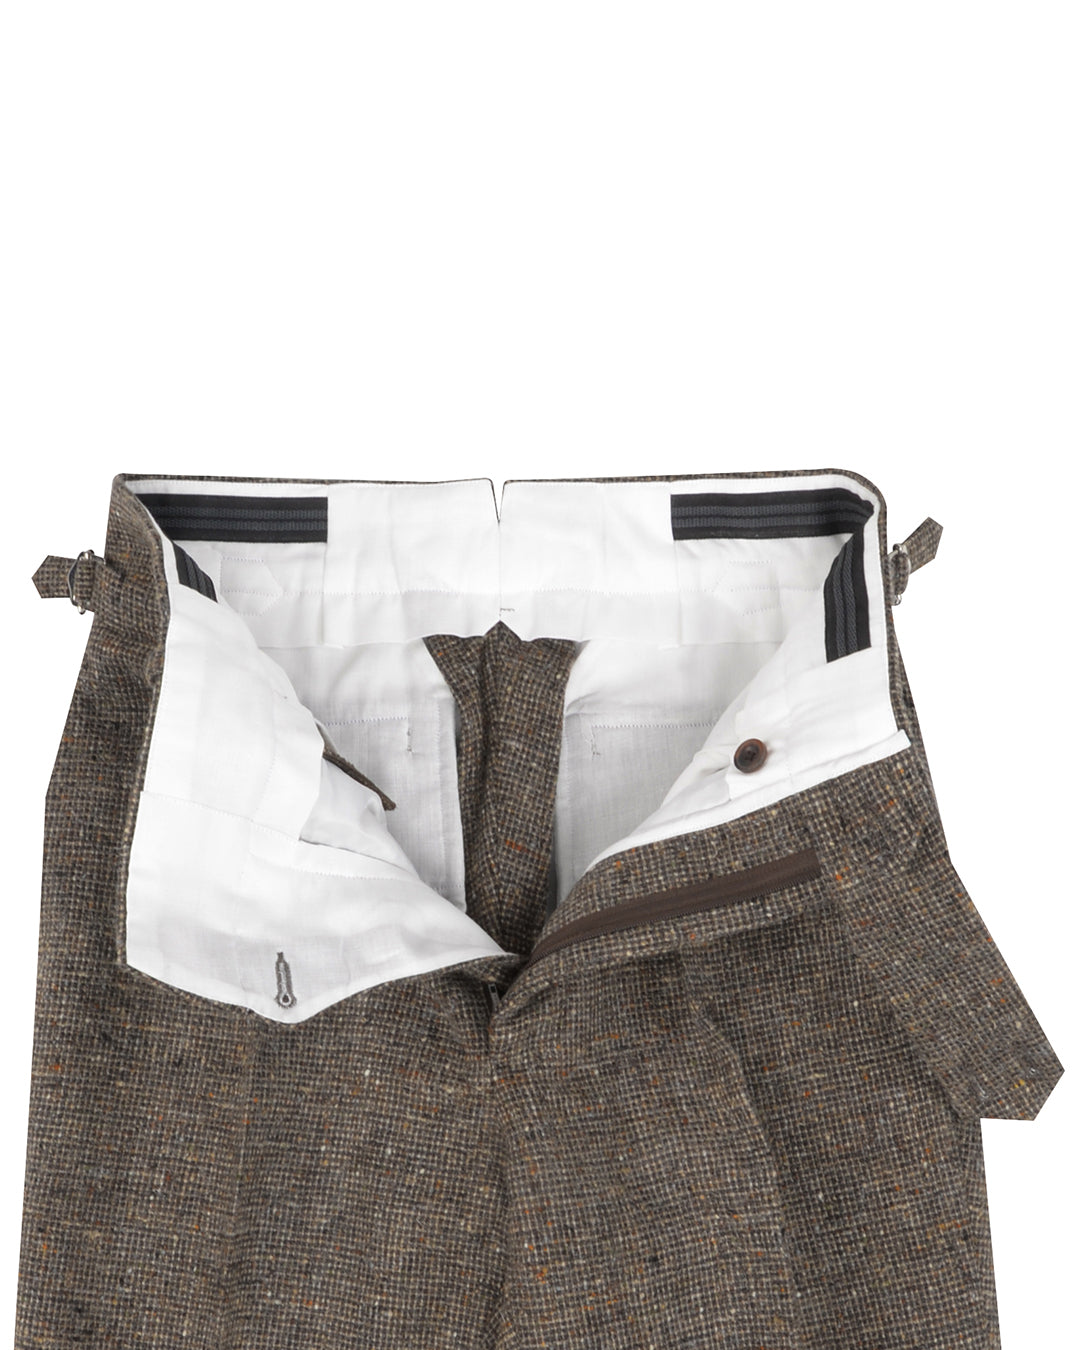 Molloy Plain Donegal Tweed Pants - Taupe